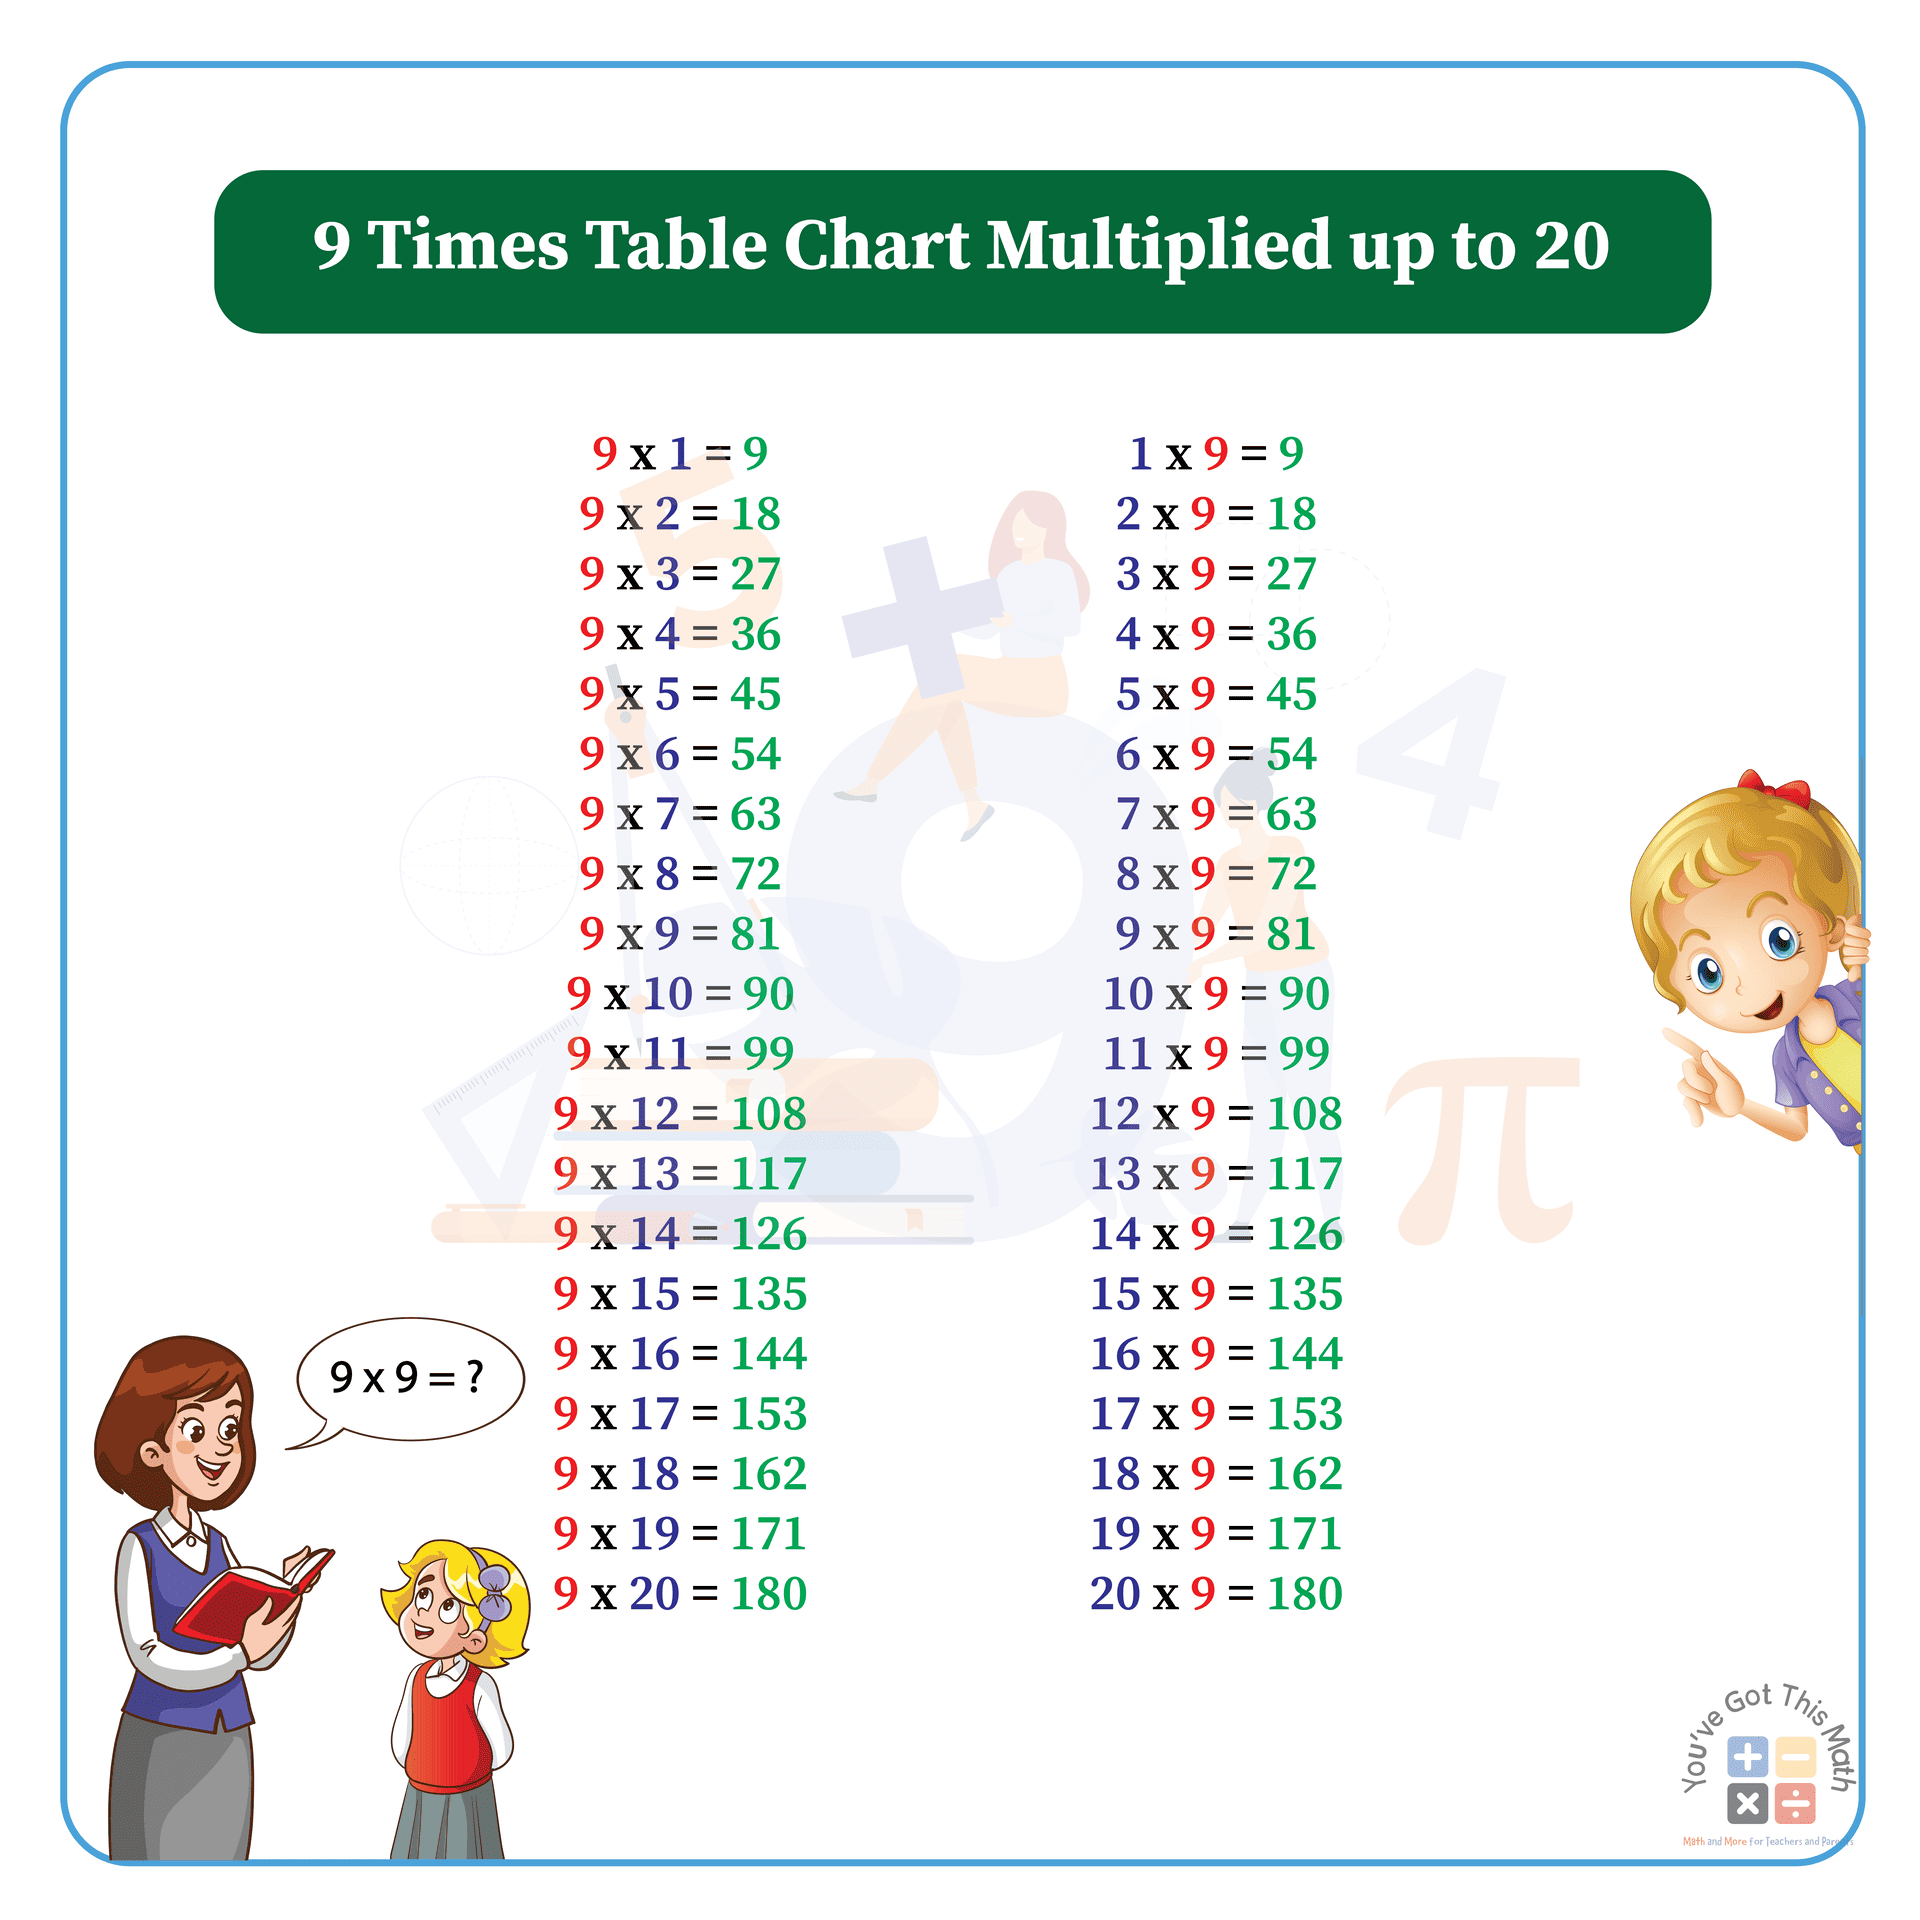 9 times table chart multiplied up to 20